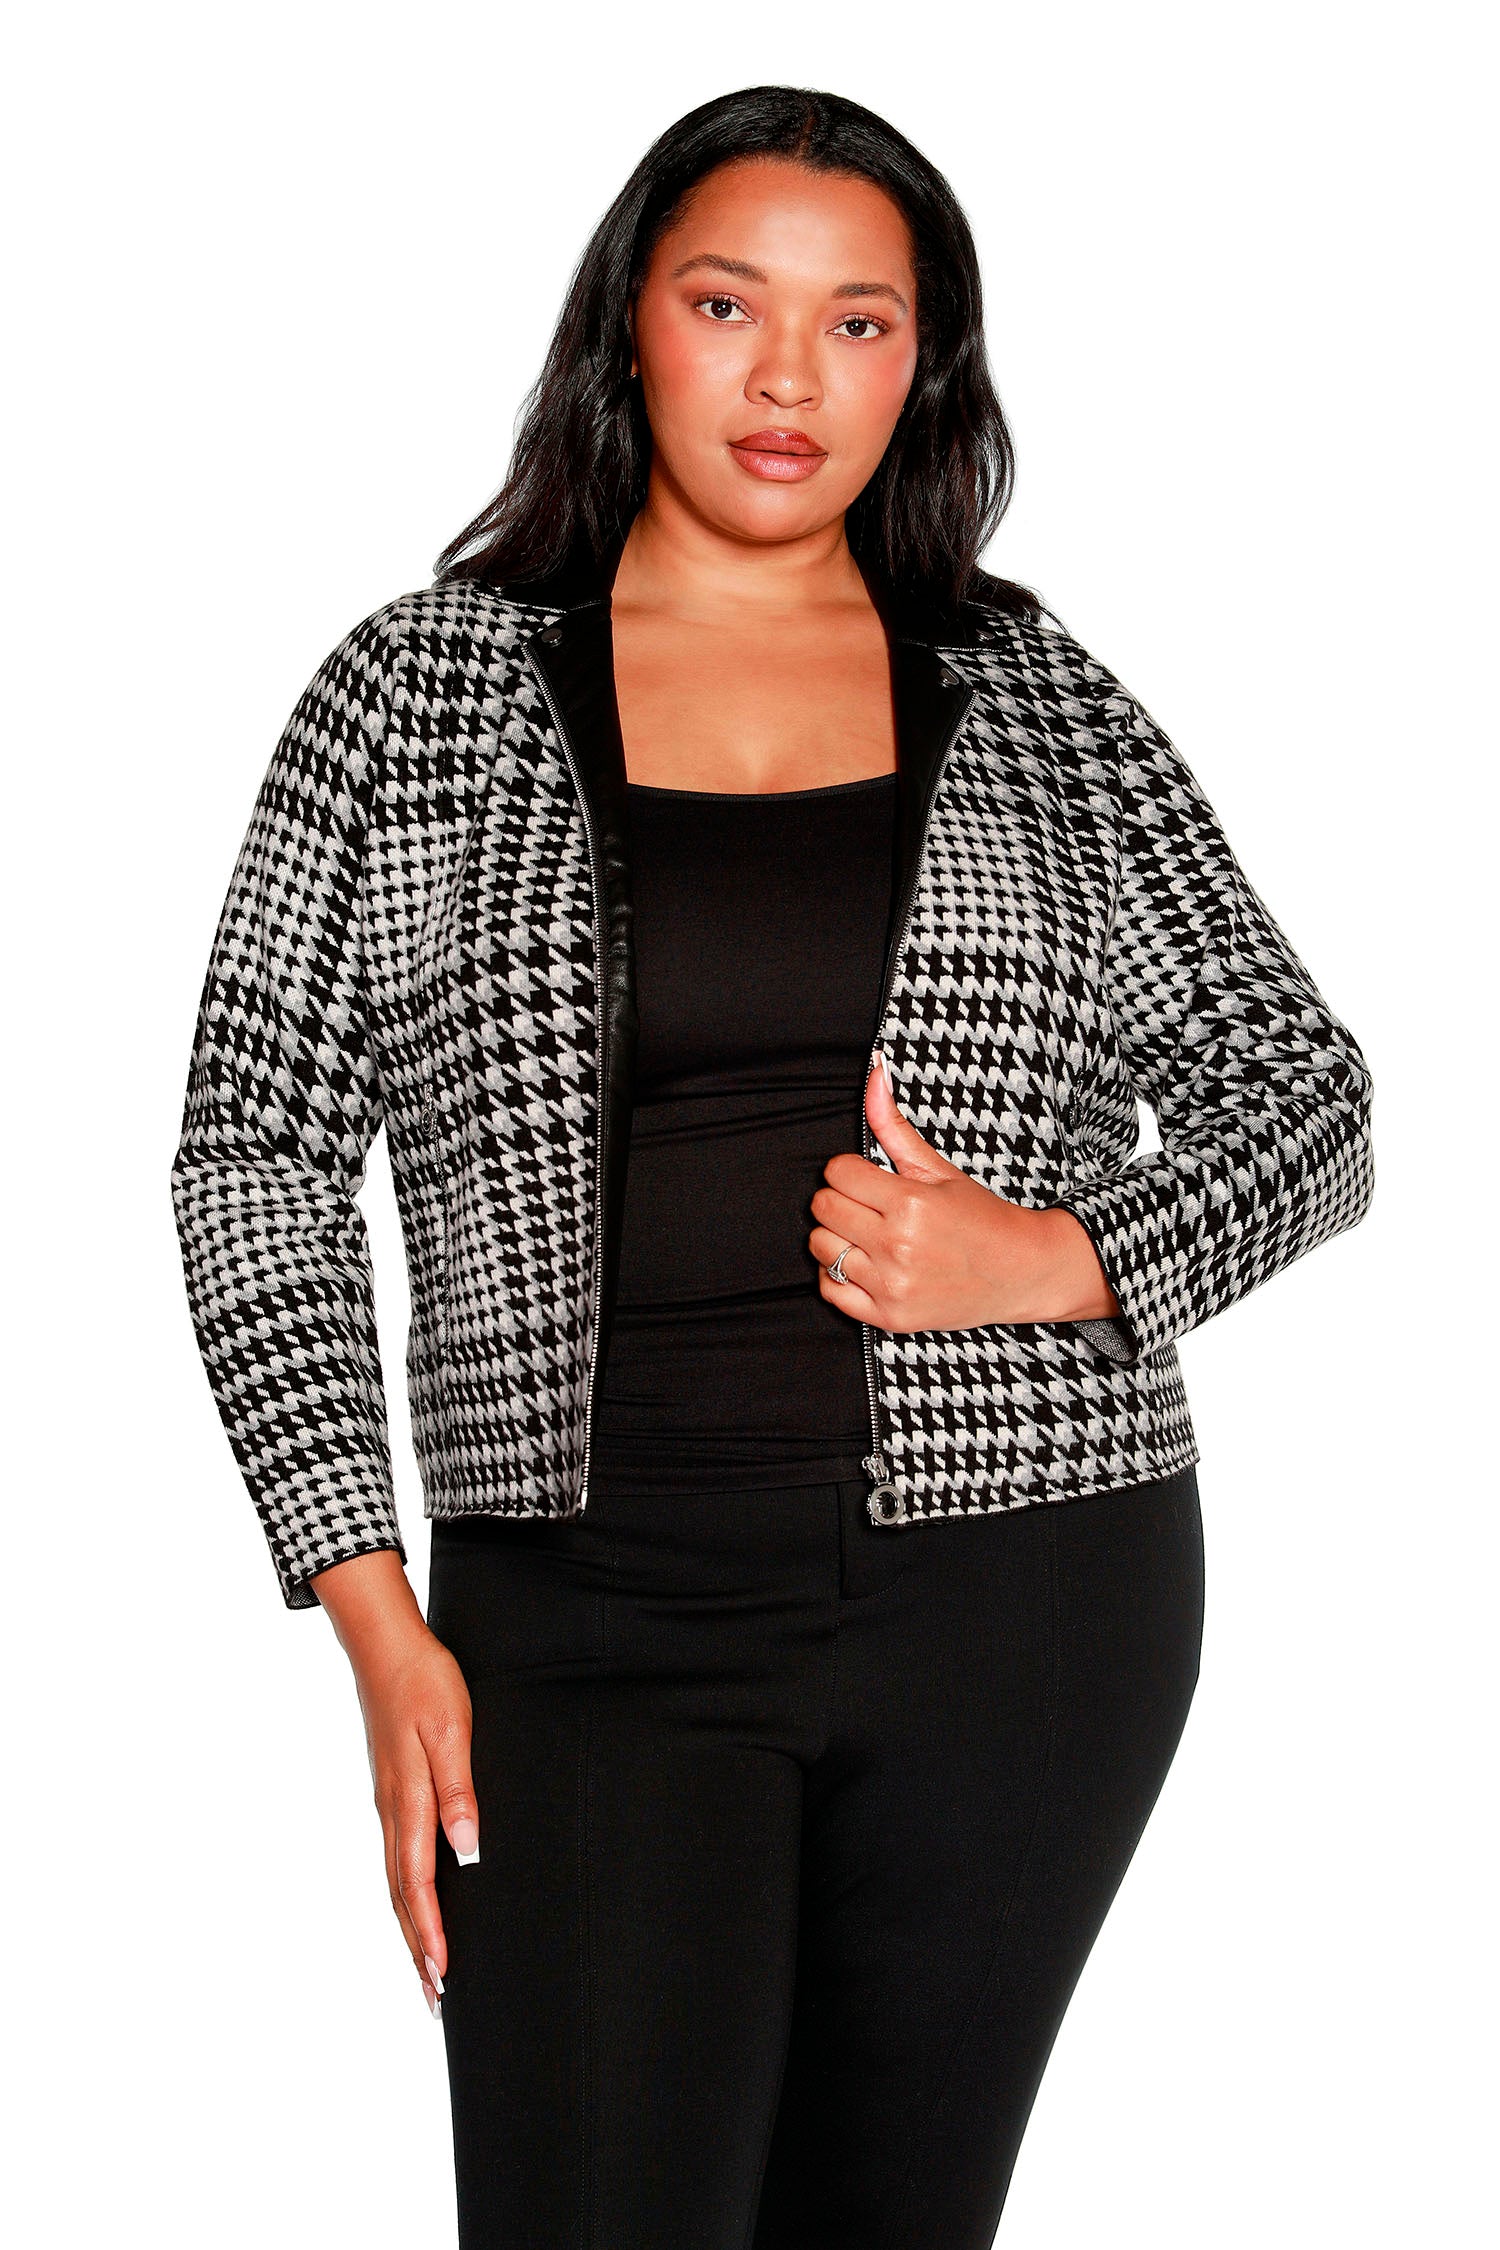 Women's Houndstooth Plaid Moto Style Jacket with Pockets and Custom Hardware | Curvy